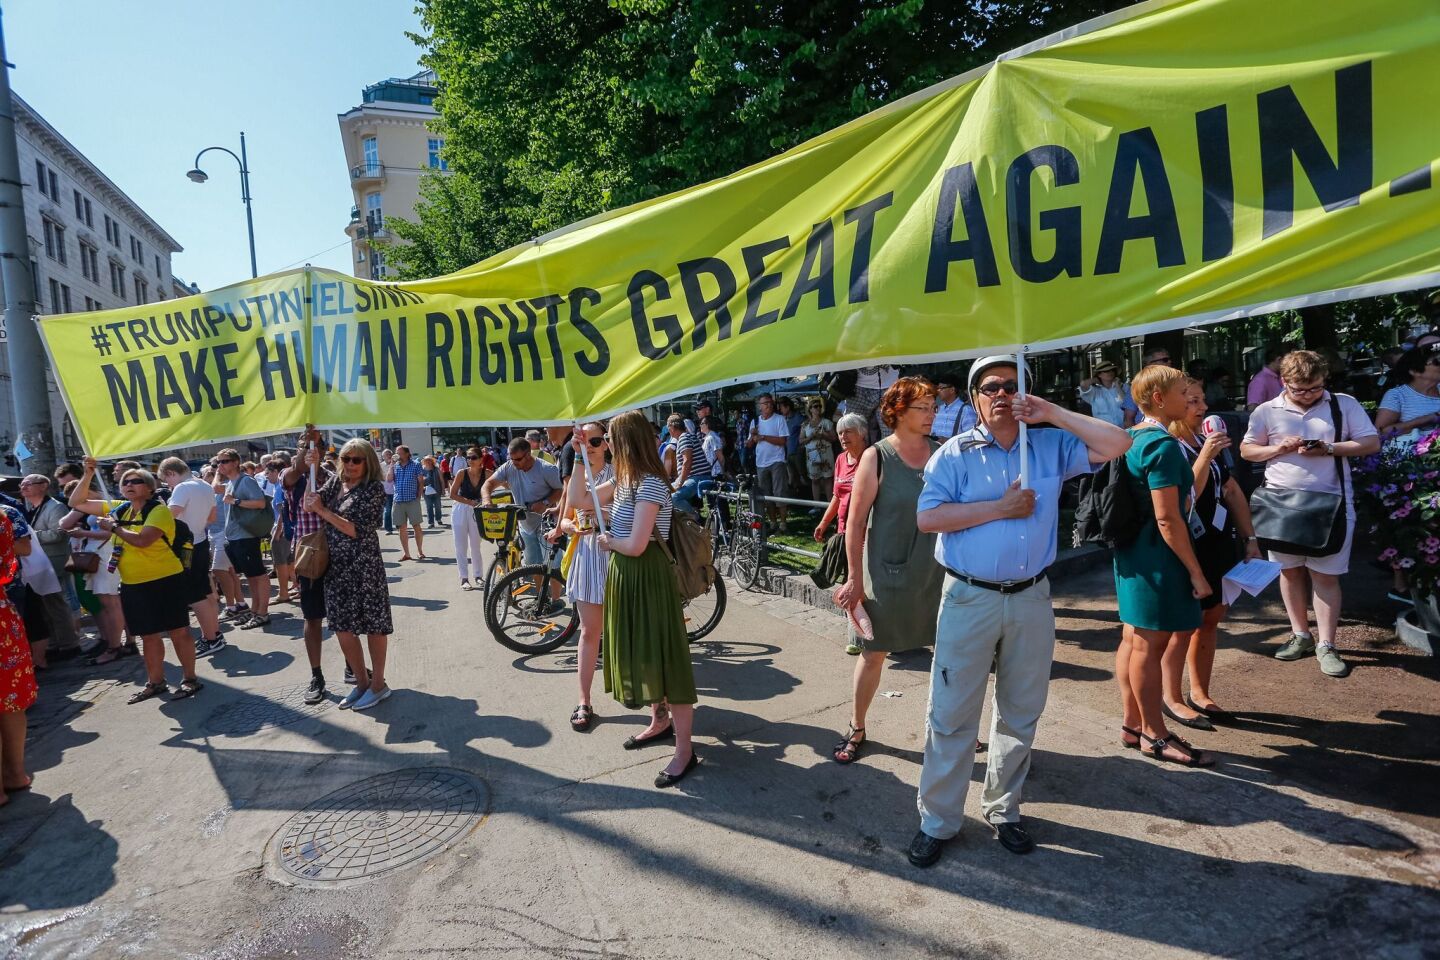 Demonstrators hold a banner calling for human rights and democracy during protests in Helsinki, Finland, during President Trump's visit to the nation.